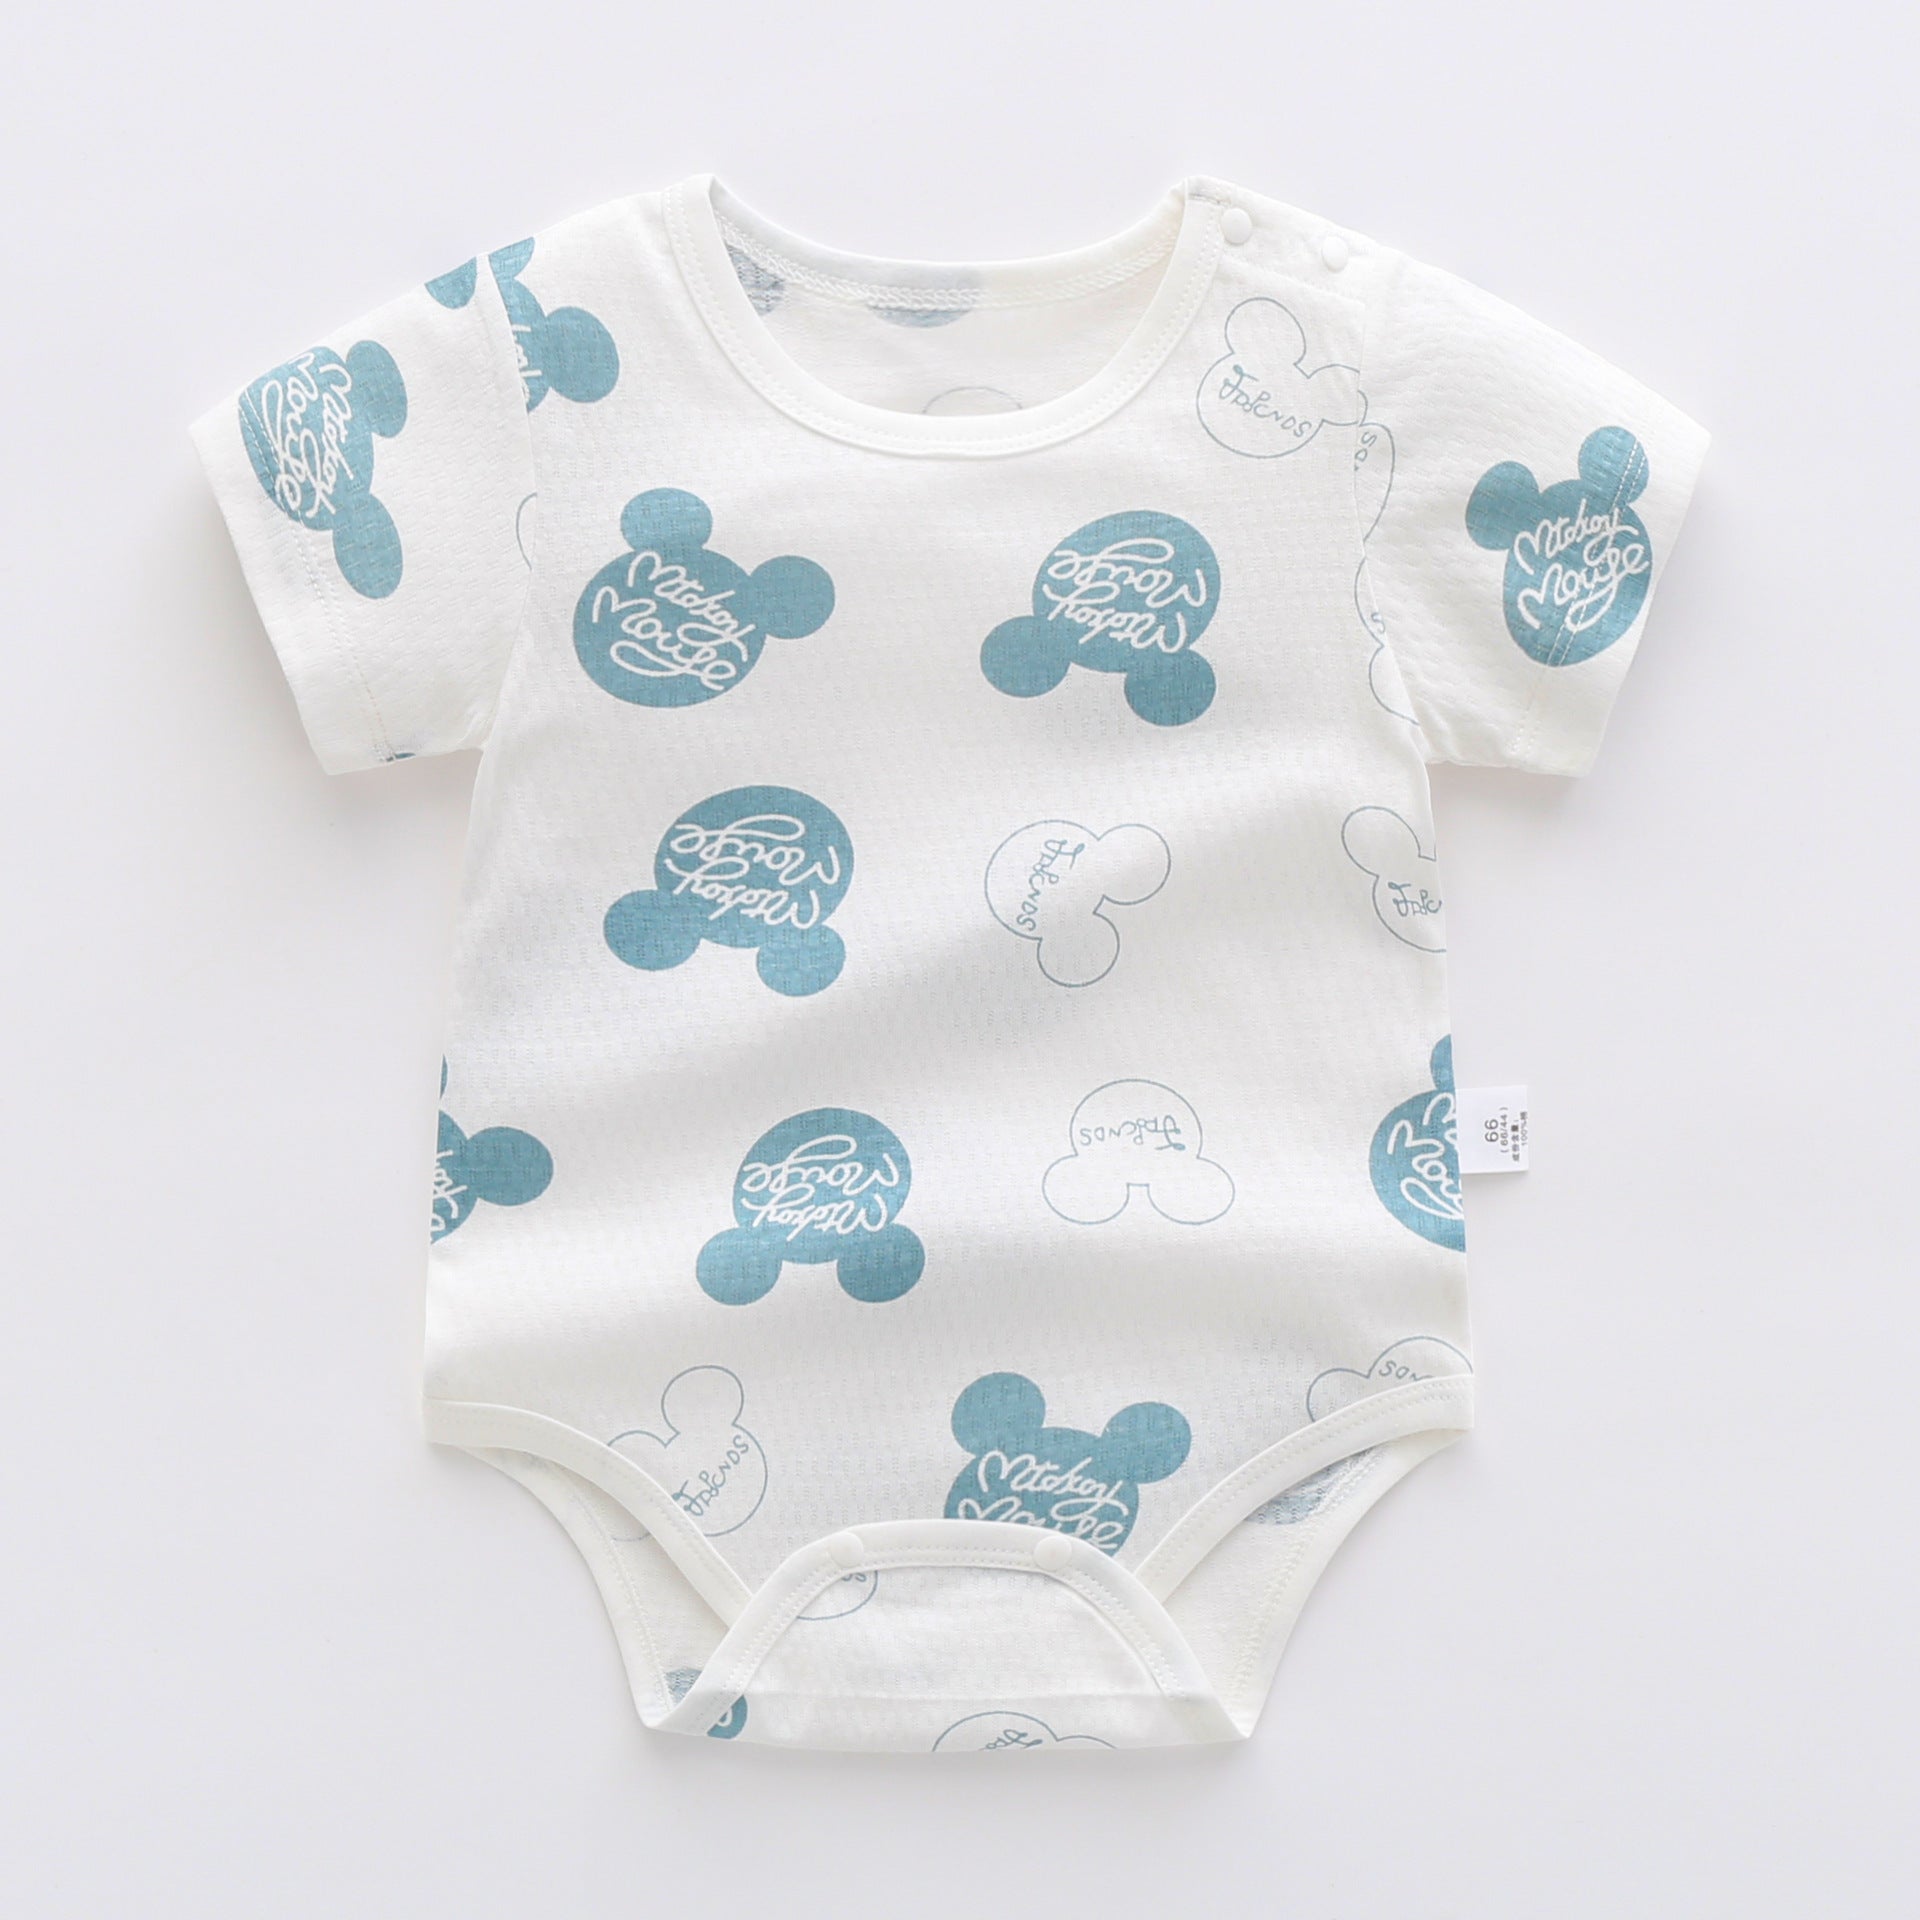 Stay Cool and Comfy with our Summer Baby Newborn Short Sleeve Jumpsuit